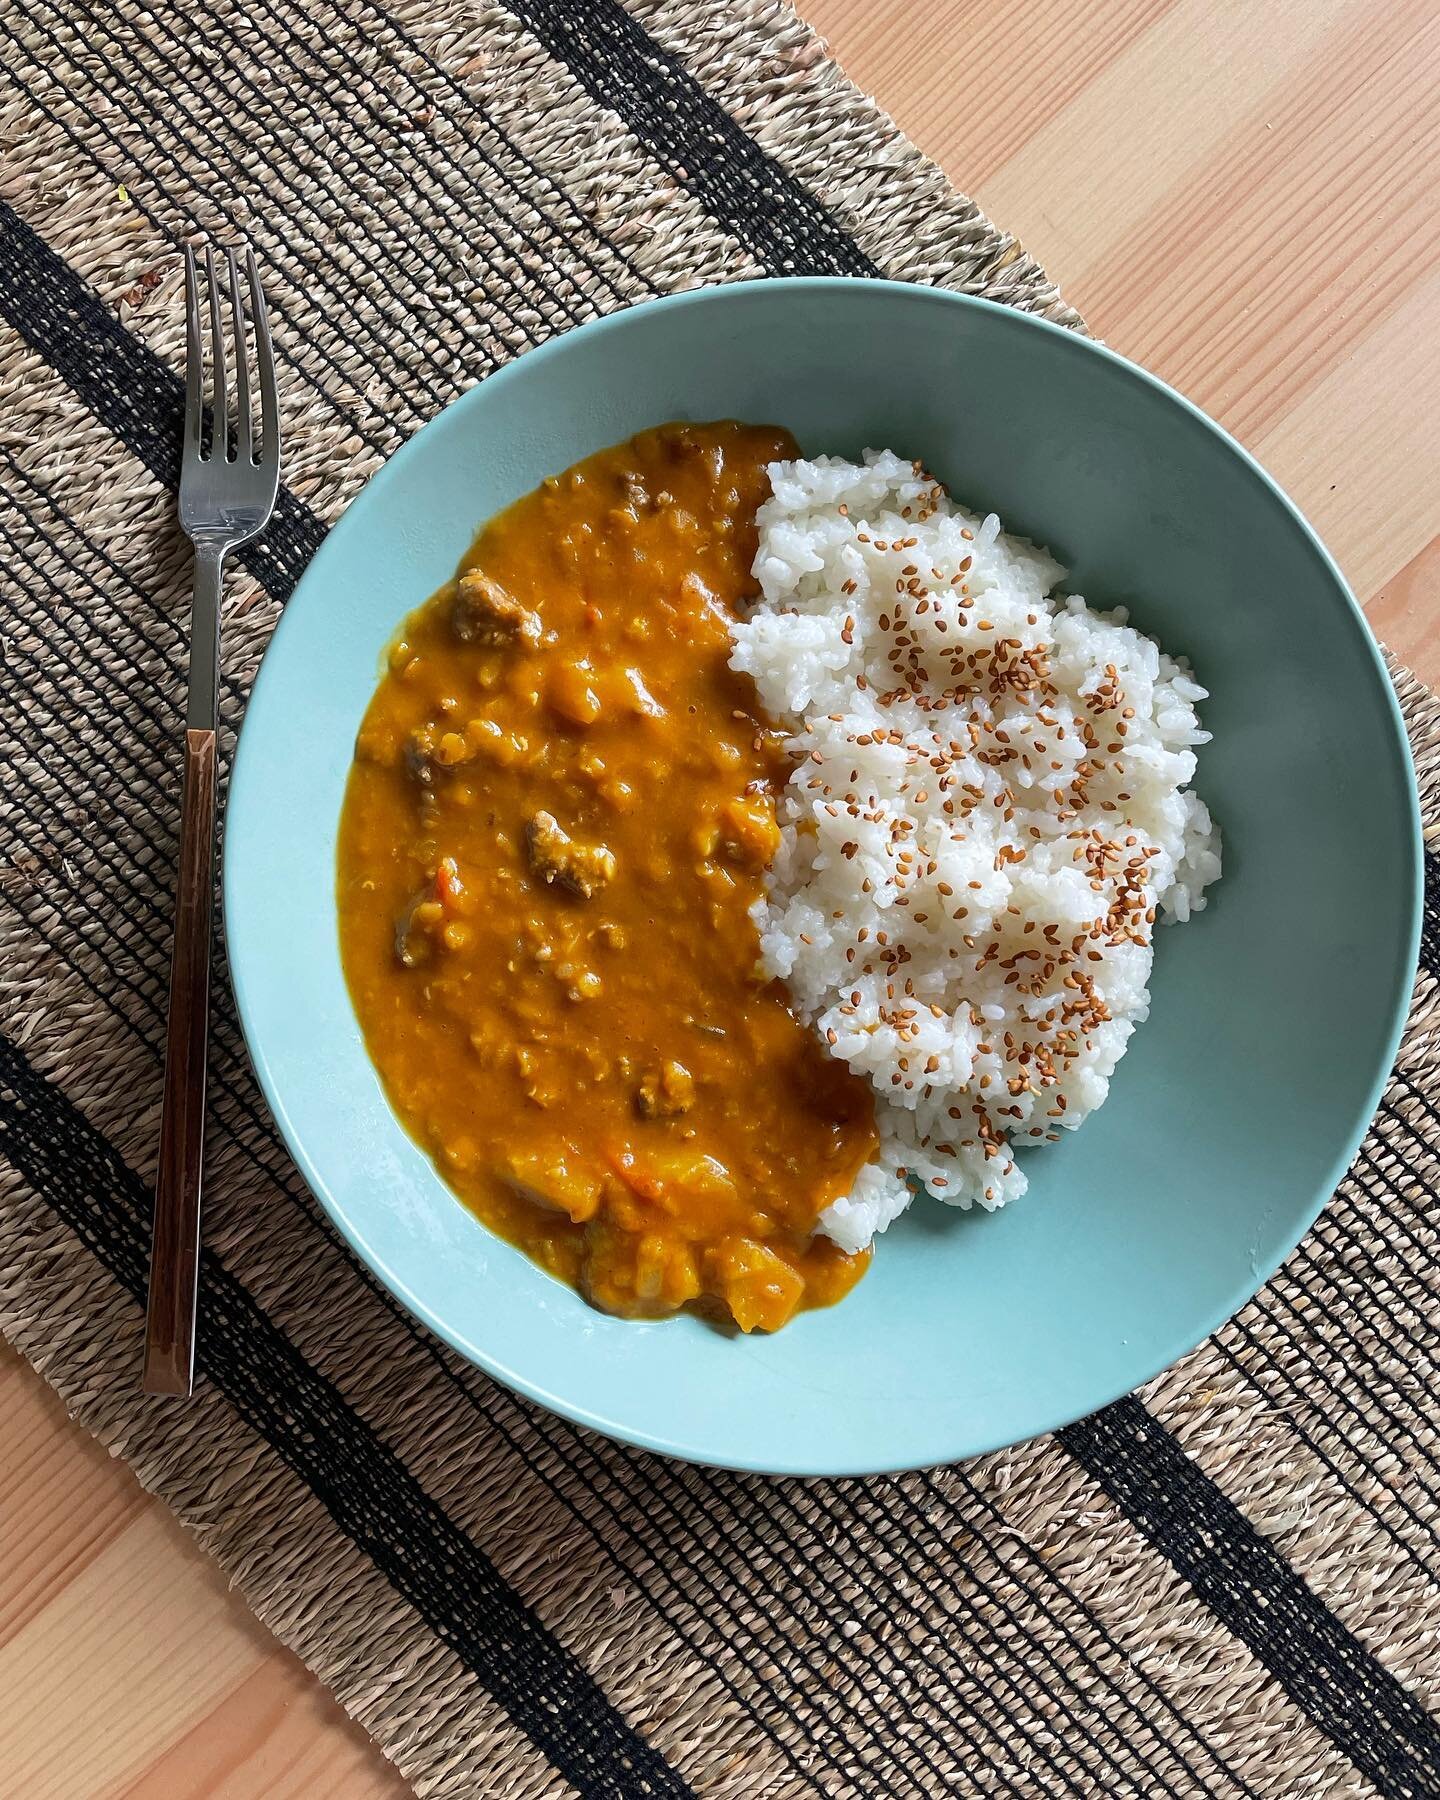 Ignoring how hot it is outside and fully embracing pumpkin curry. Japanese curry rice is one of the most comforting dishes out there so it&rsquo;s a perfect dish for autumn. The pumpkin almost melts into the curry sauce making it super rich and cream